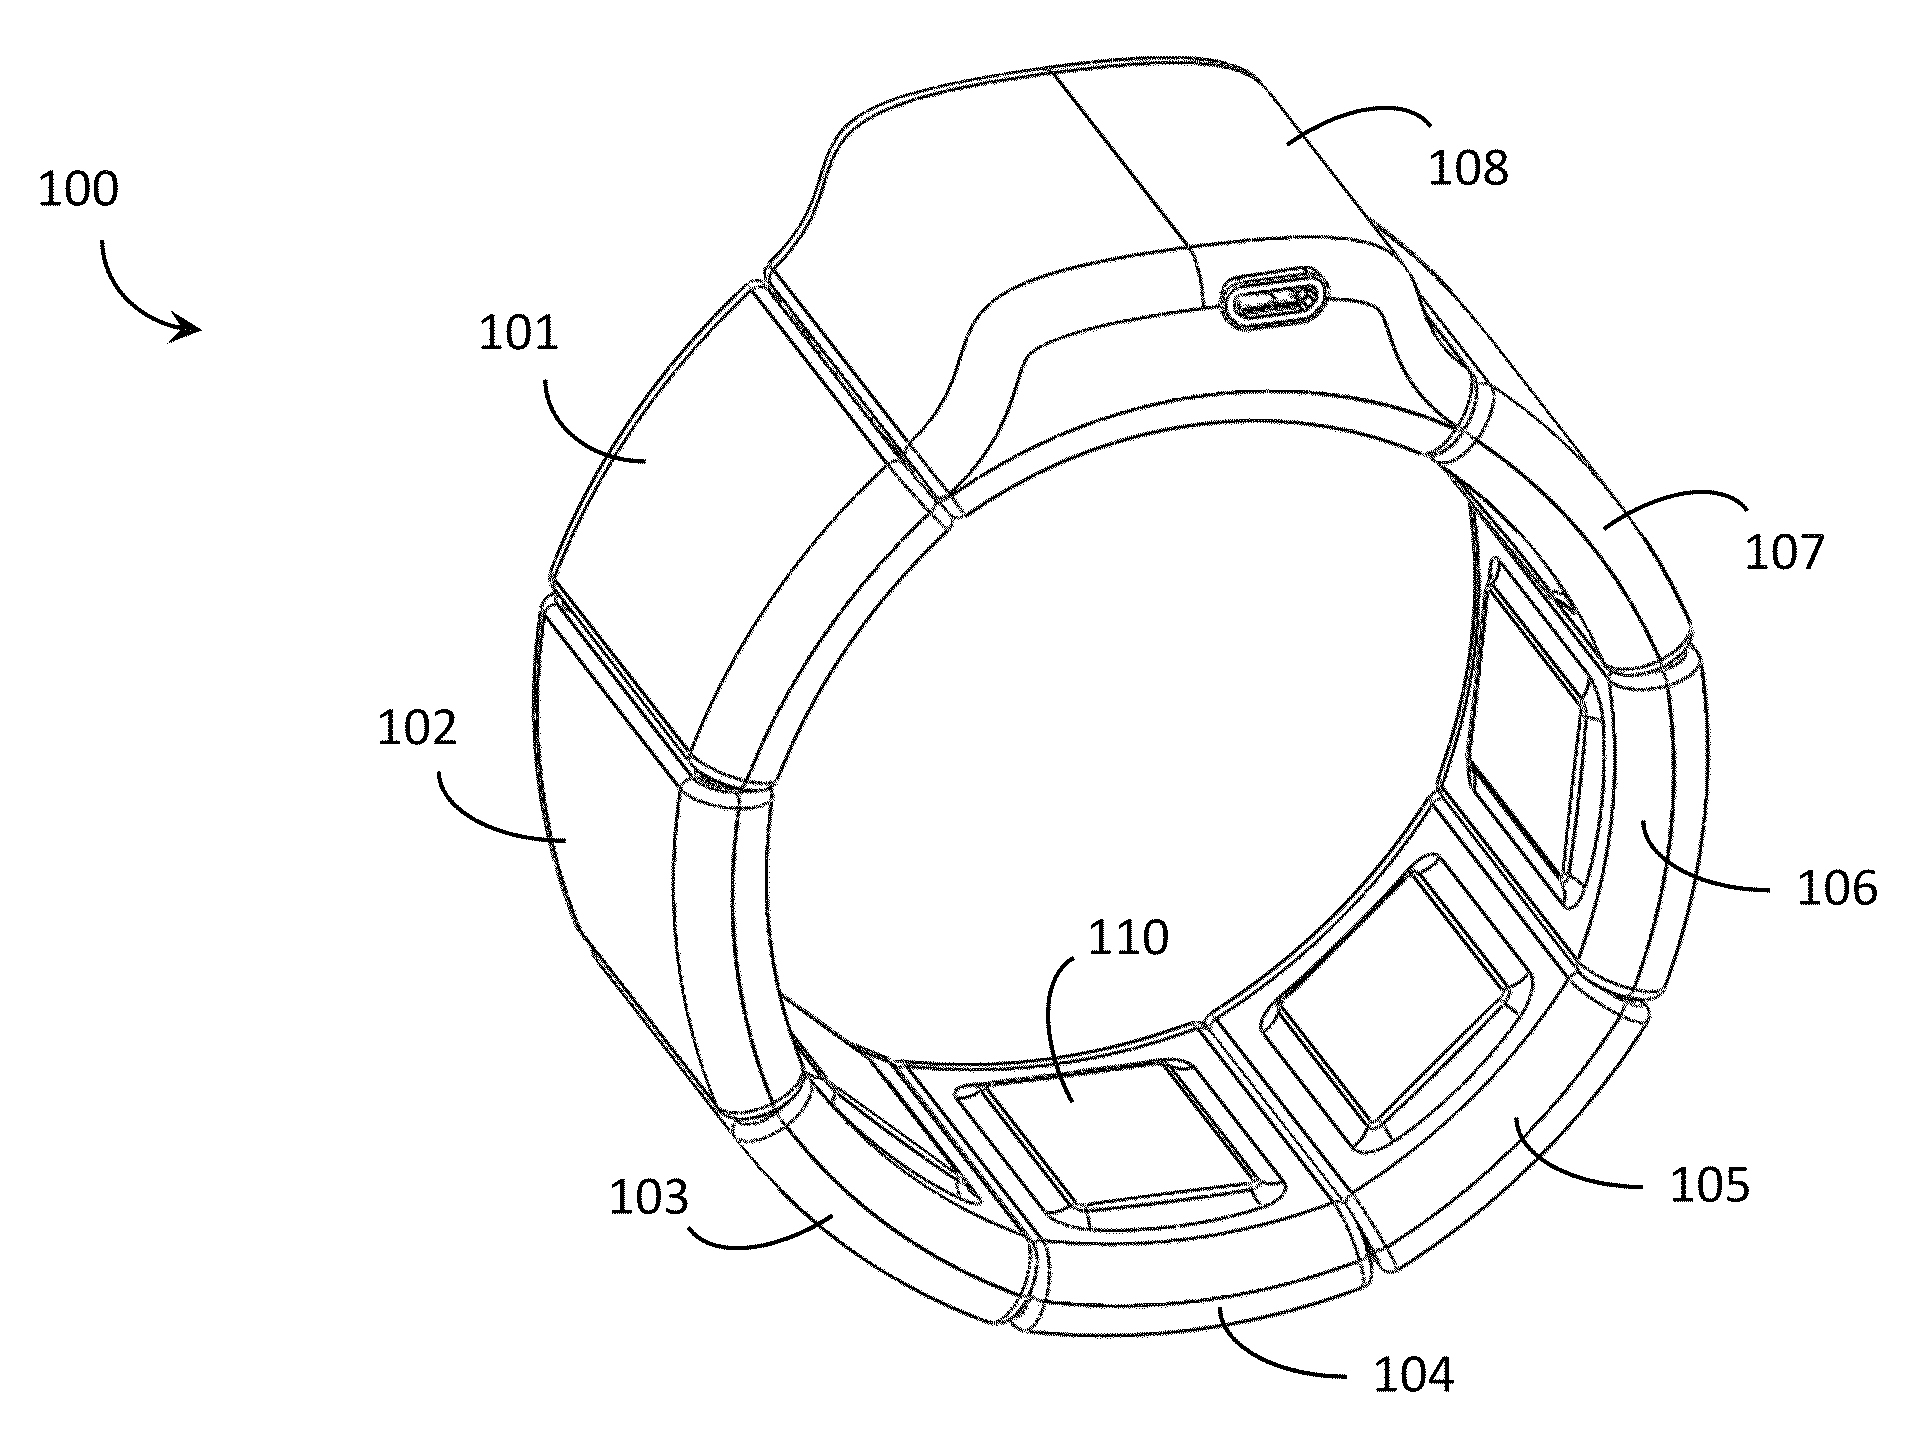 Systems, articles and methods for strain mitigation in wearable electronic devices